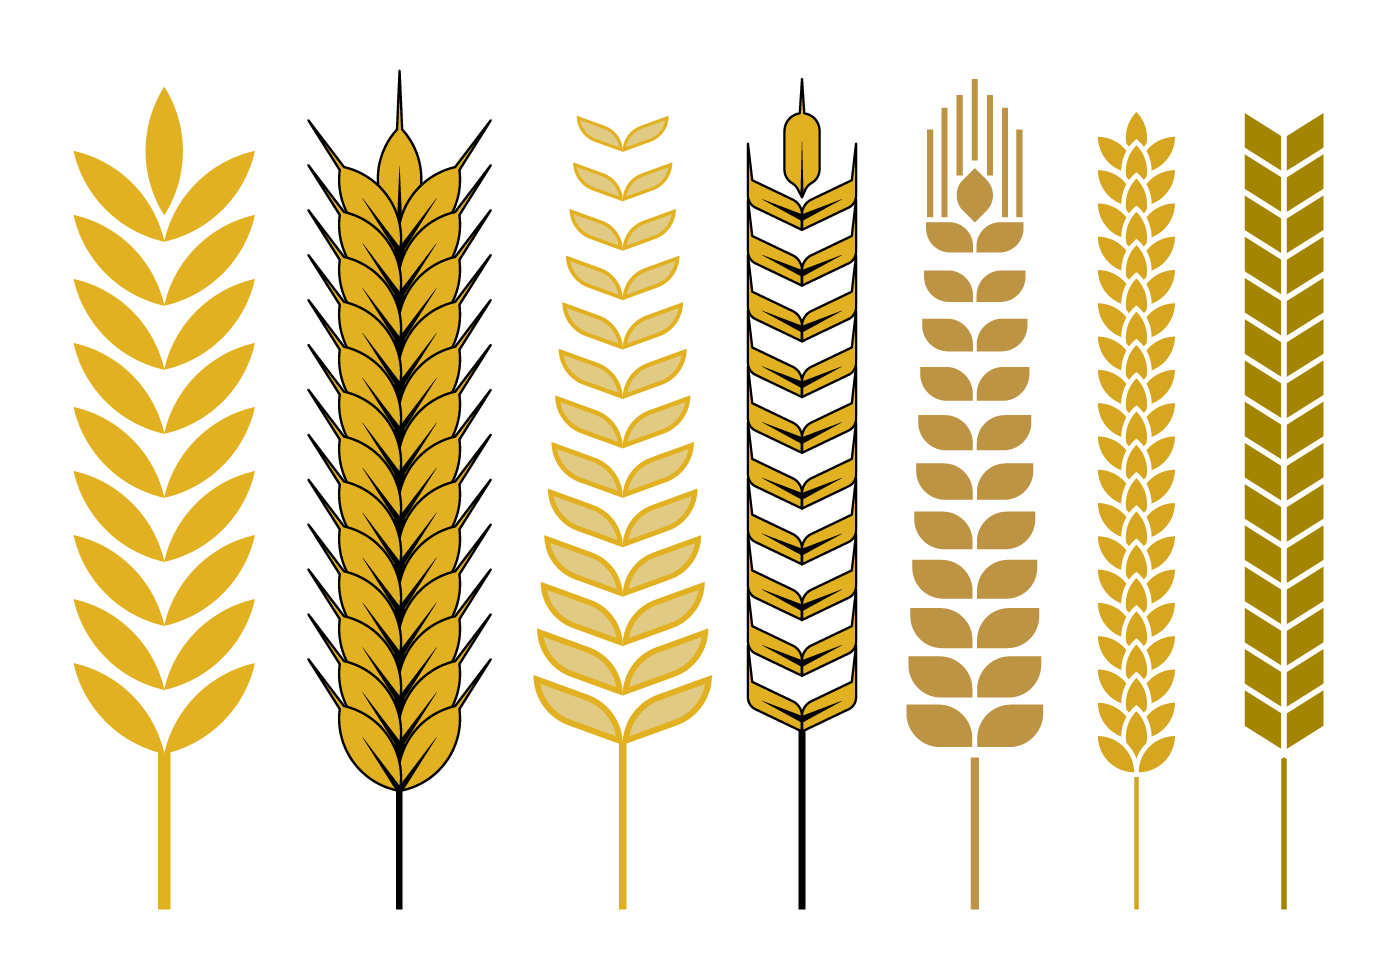 Wheat Stalk Vector - Download Free Vector Art, Stock Graphics & Images